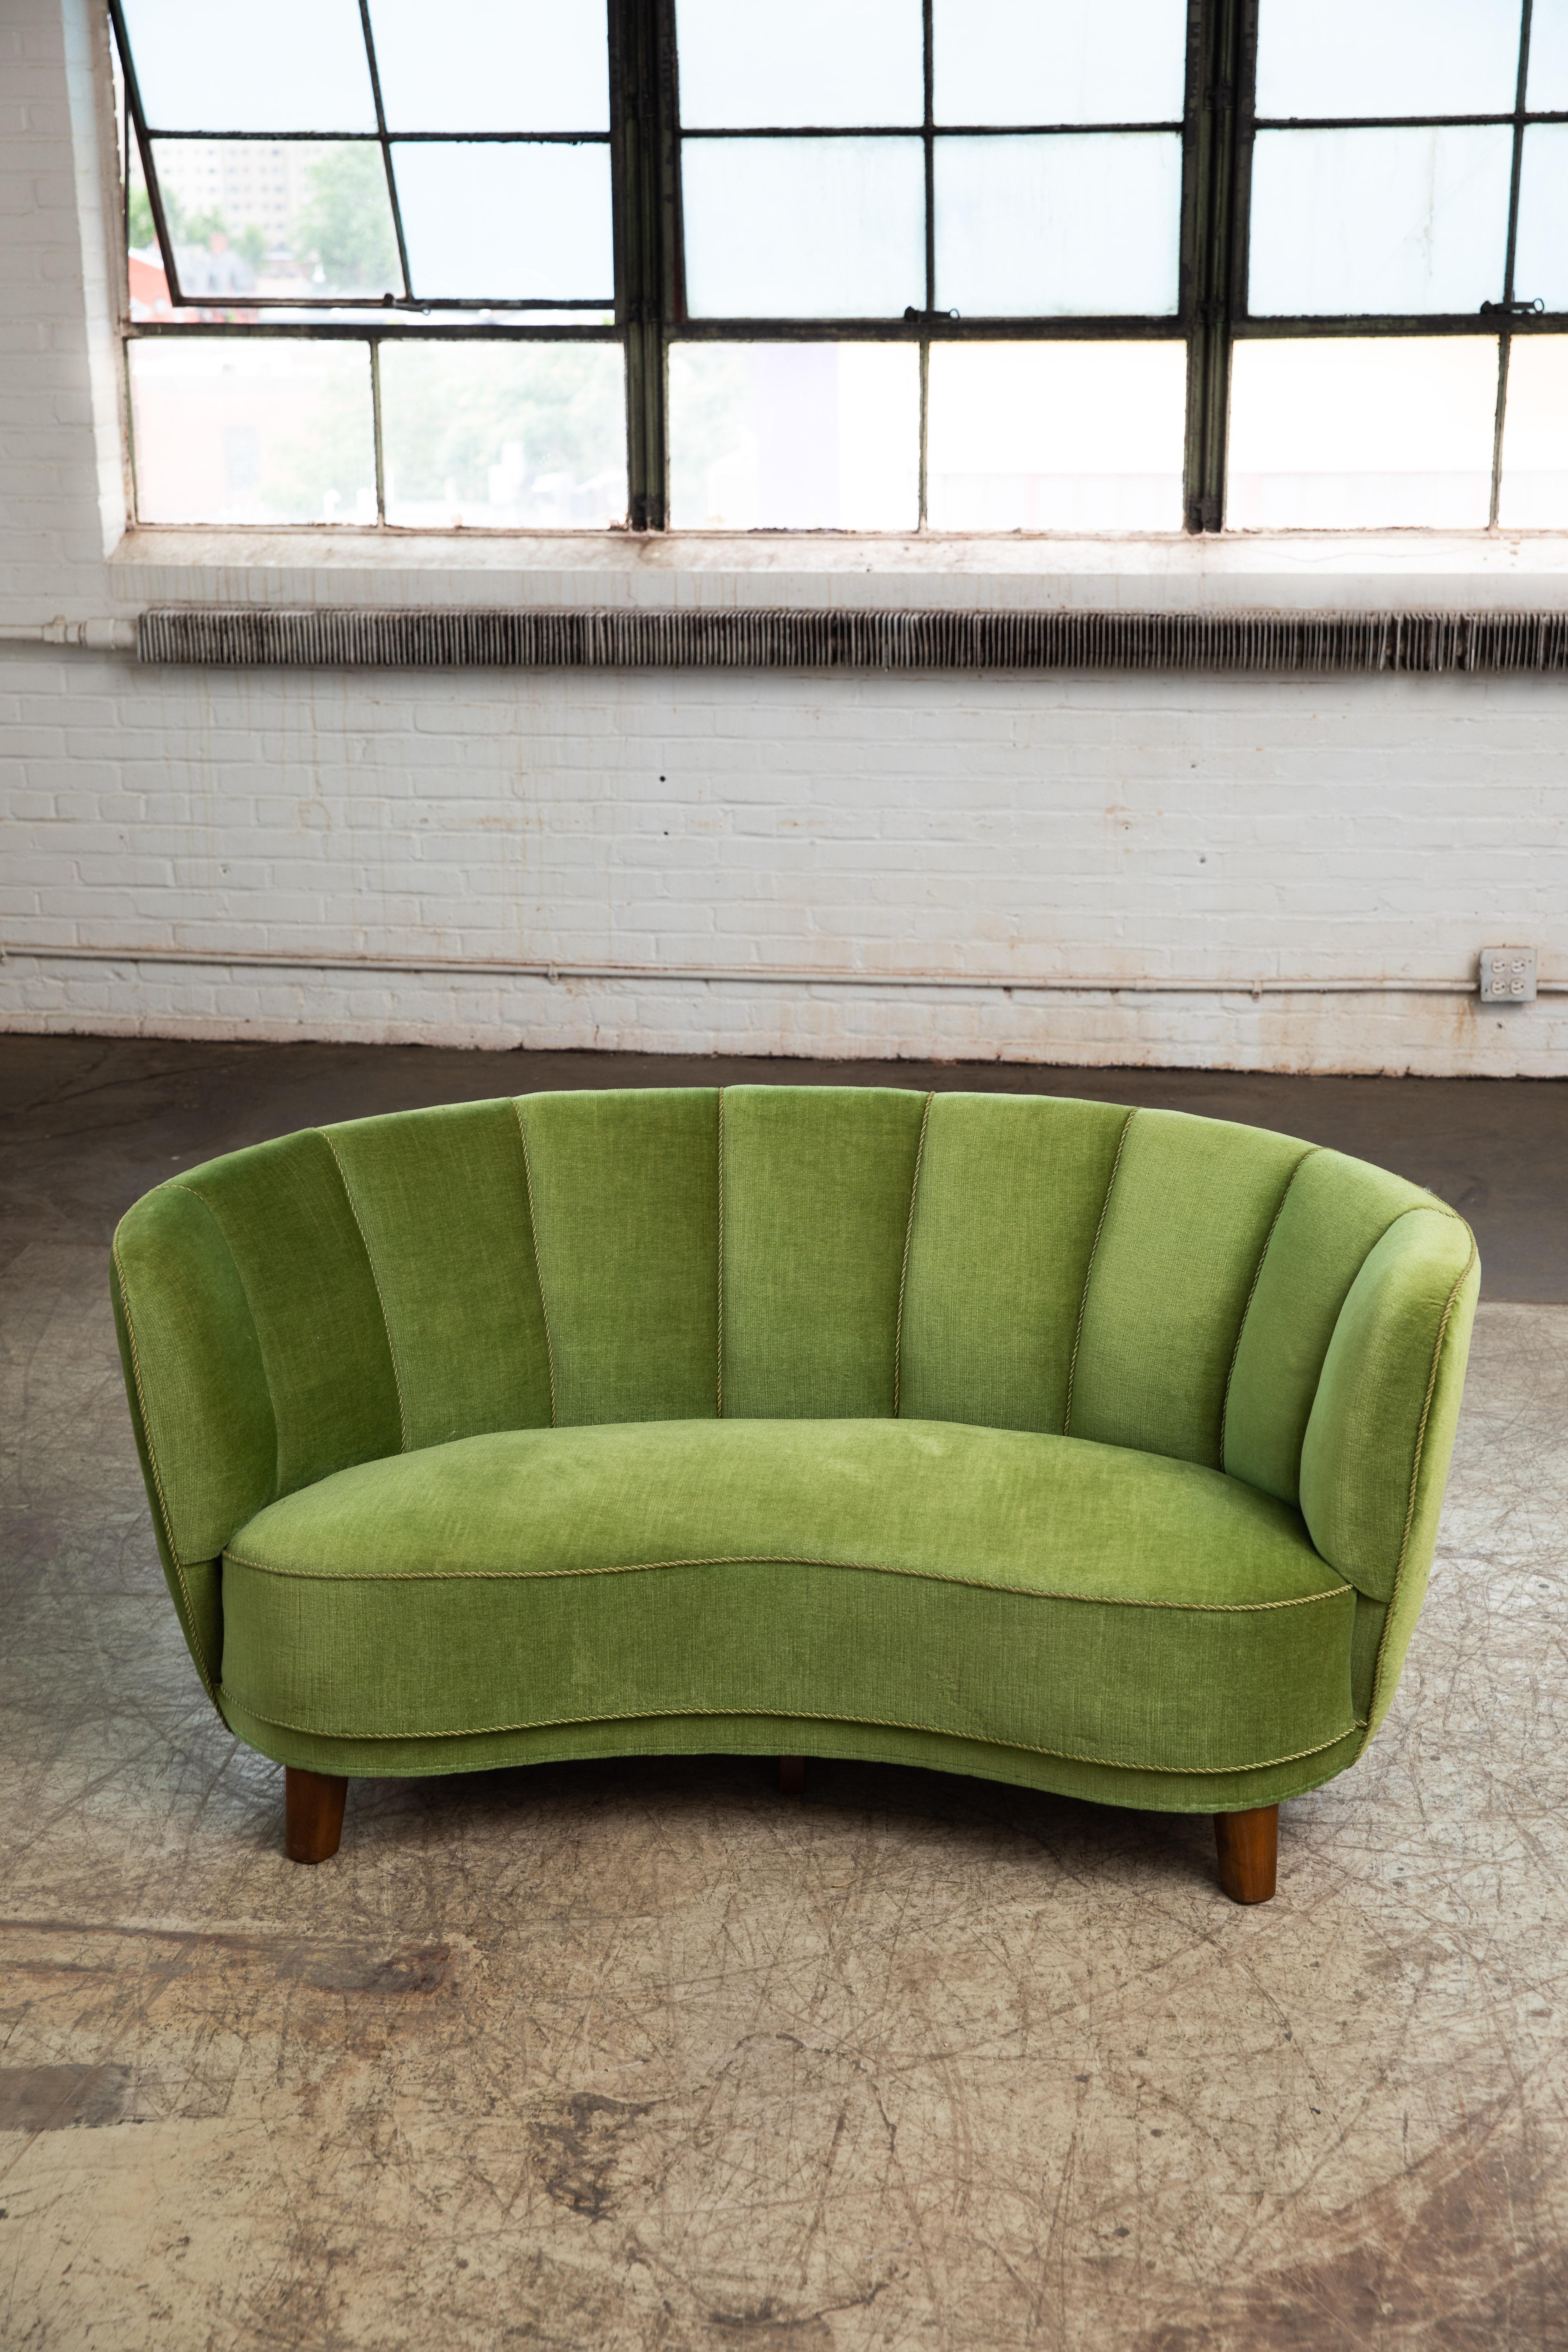 Beautiful and very elegant 1940s curved two-seat sofa in green mohair wool fabric. The sofa has springs in the seat and the backrest and the cushions are nice and firm and the sofa very sturdy. The sofa was re-upholstered at a later point and the